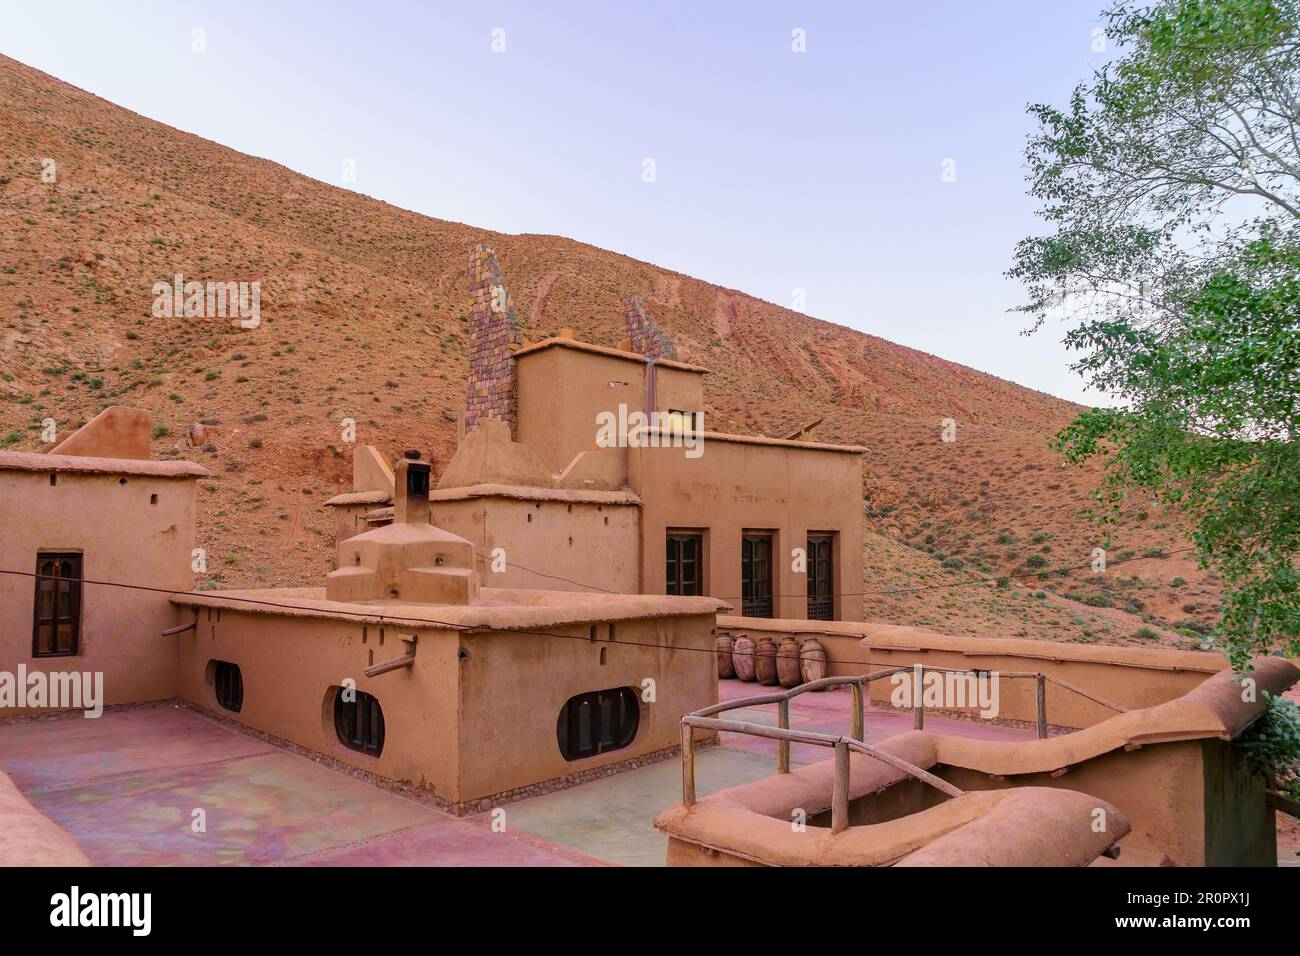 View of Hotel building in the Dades Gorge, the High Atlas Mountains, Central Morocco Stock Photo